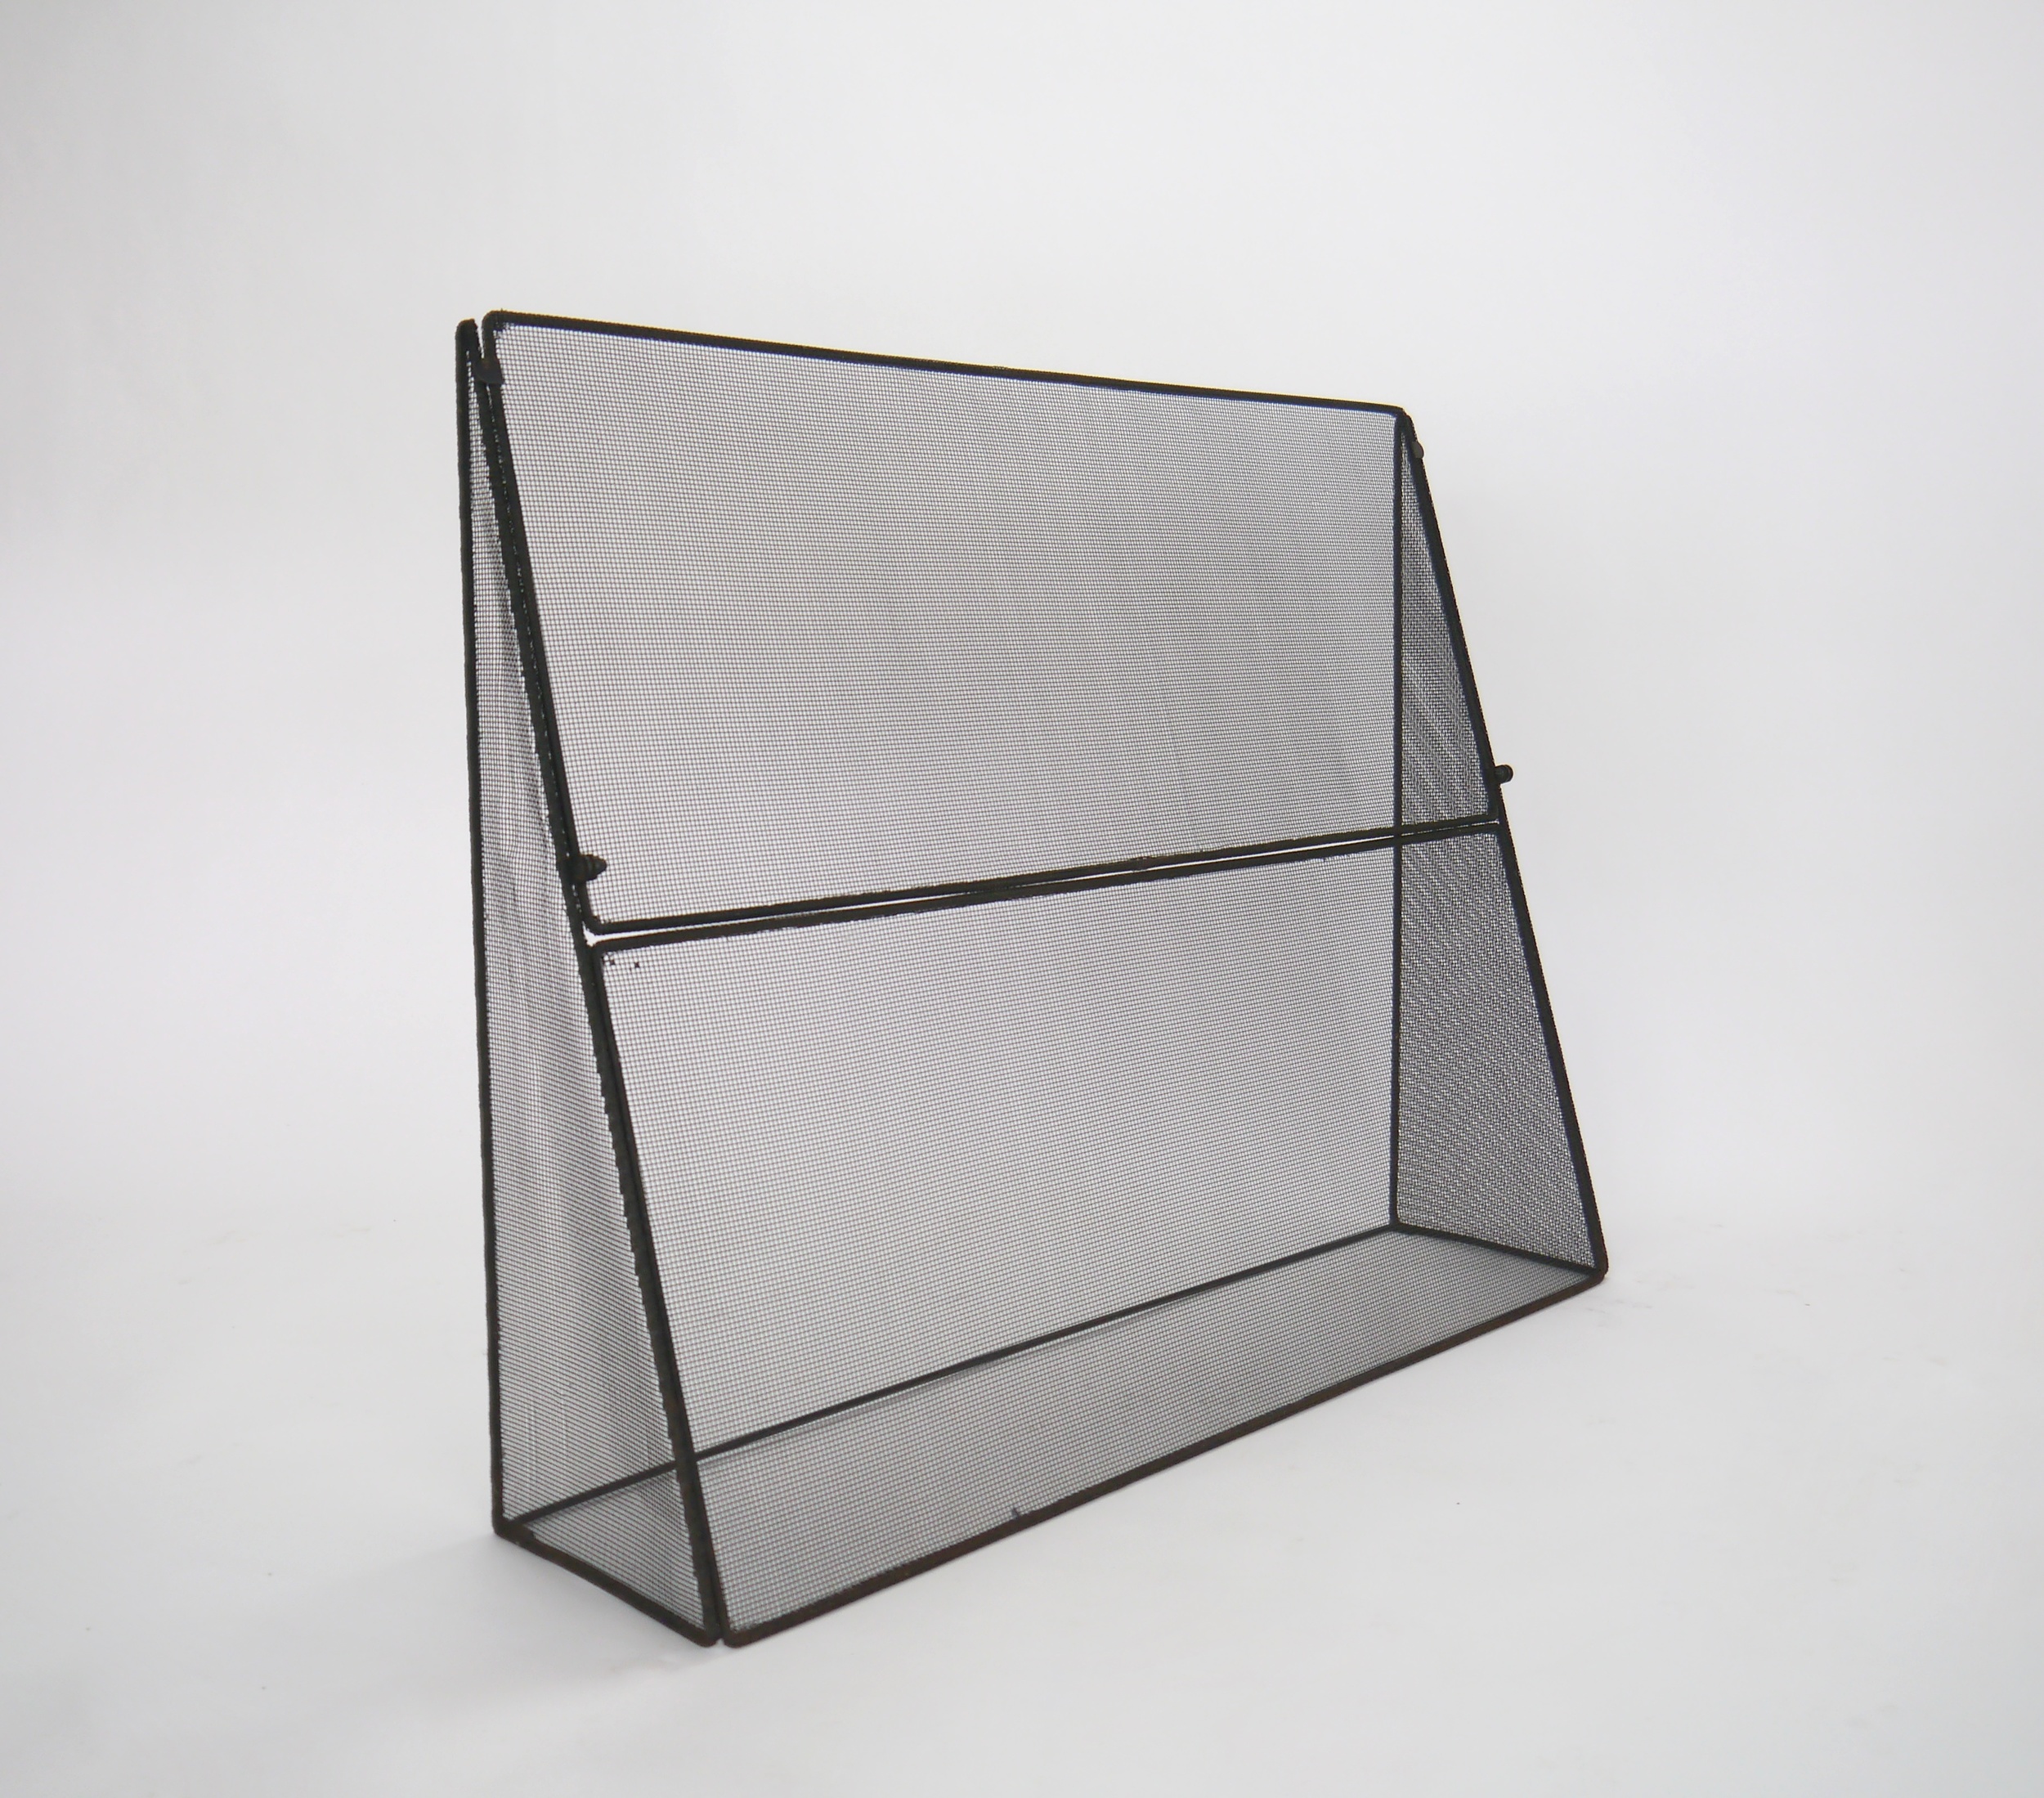 Rare Fire Screen by George Nelson — Continuum 20th Century Design